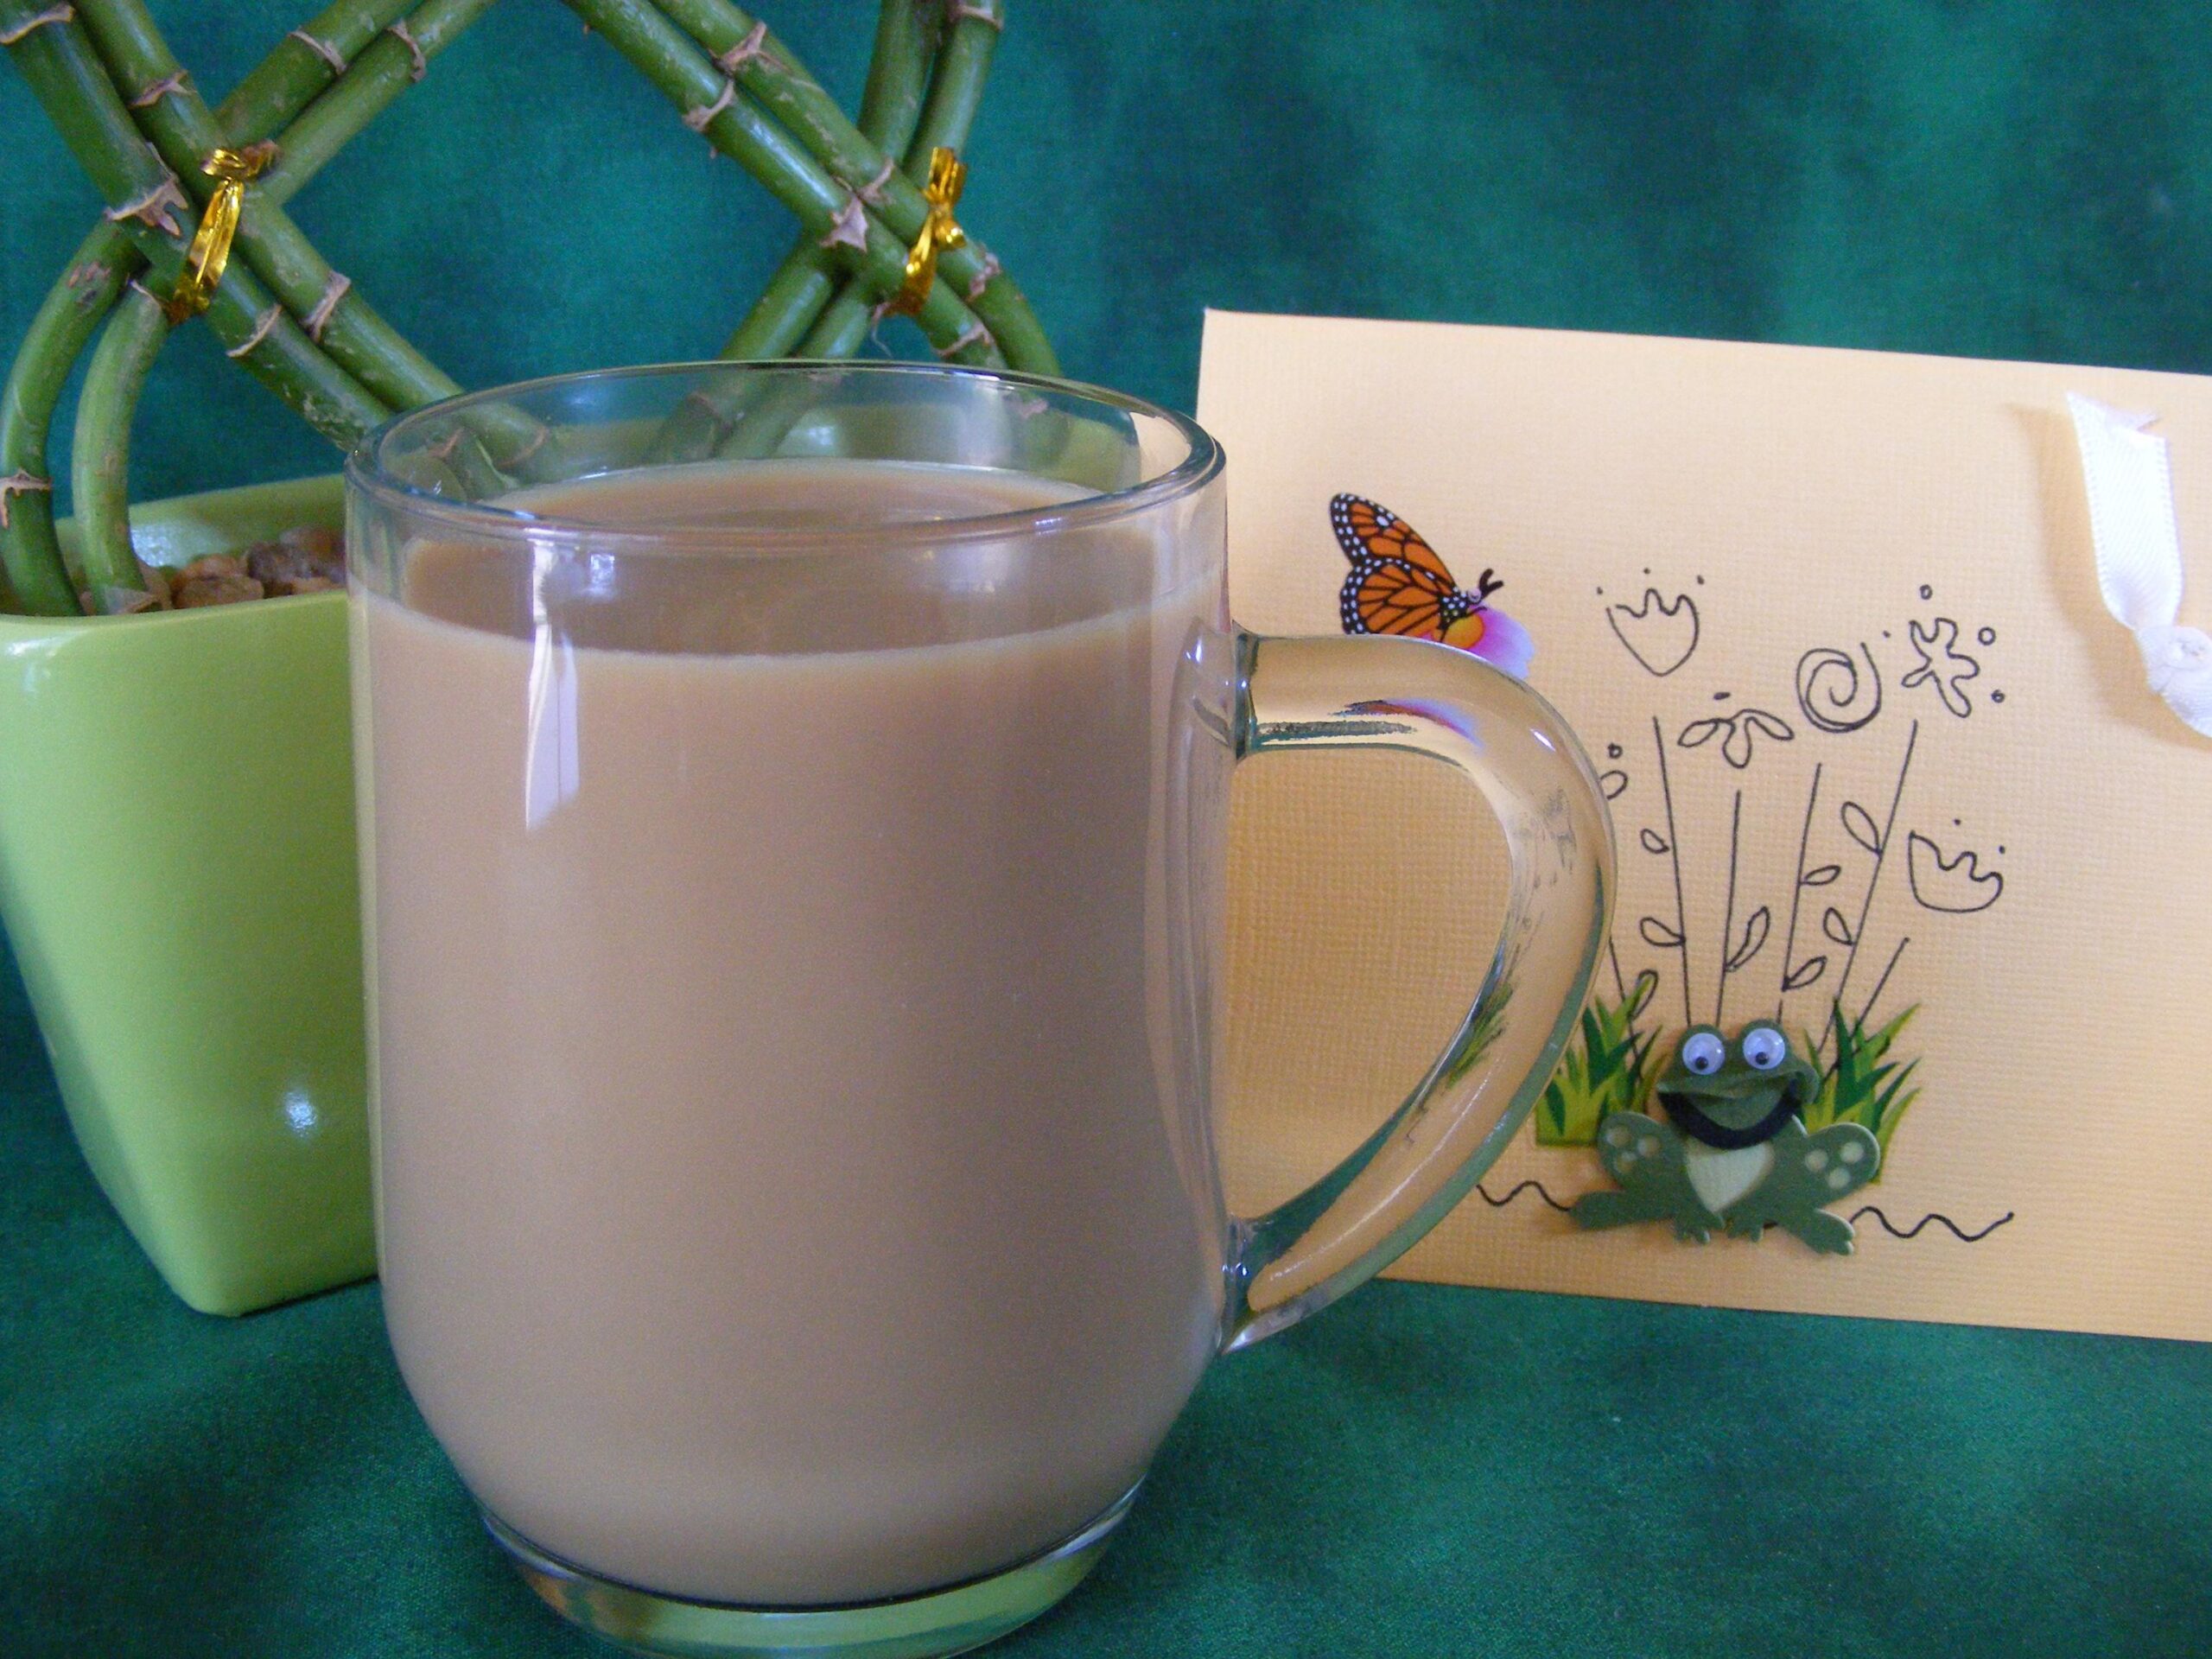  A cozy cup of Irish Coffee is the perfect way to start your day!